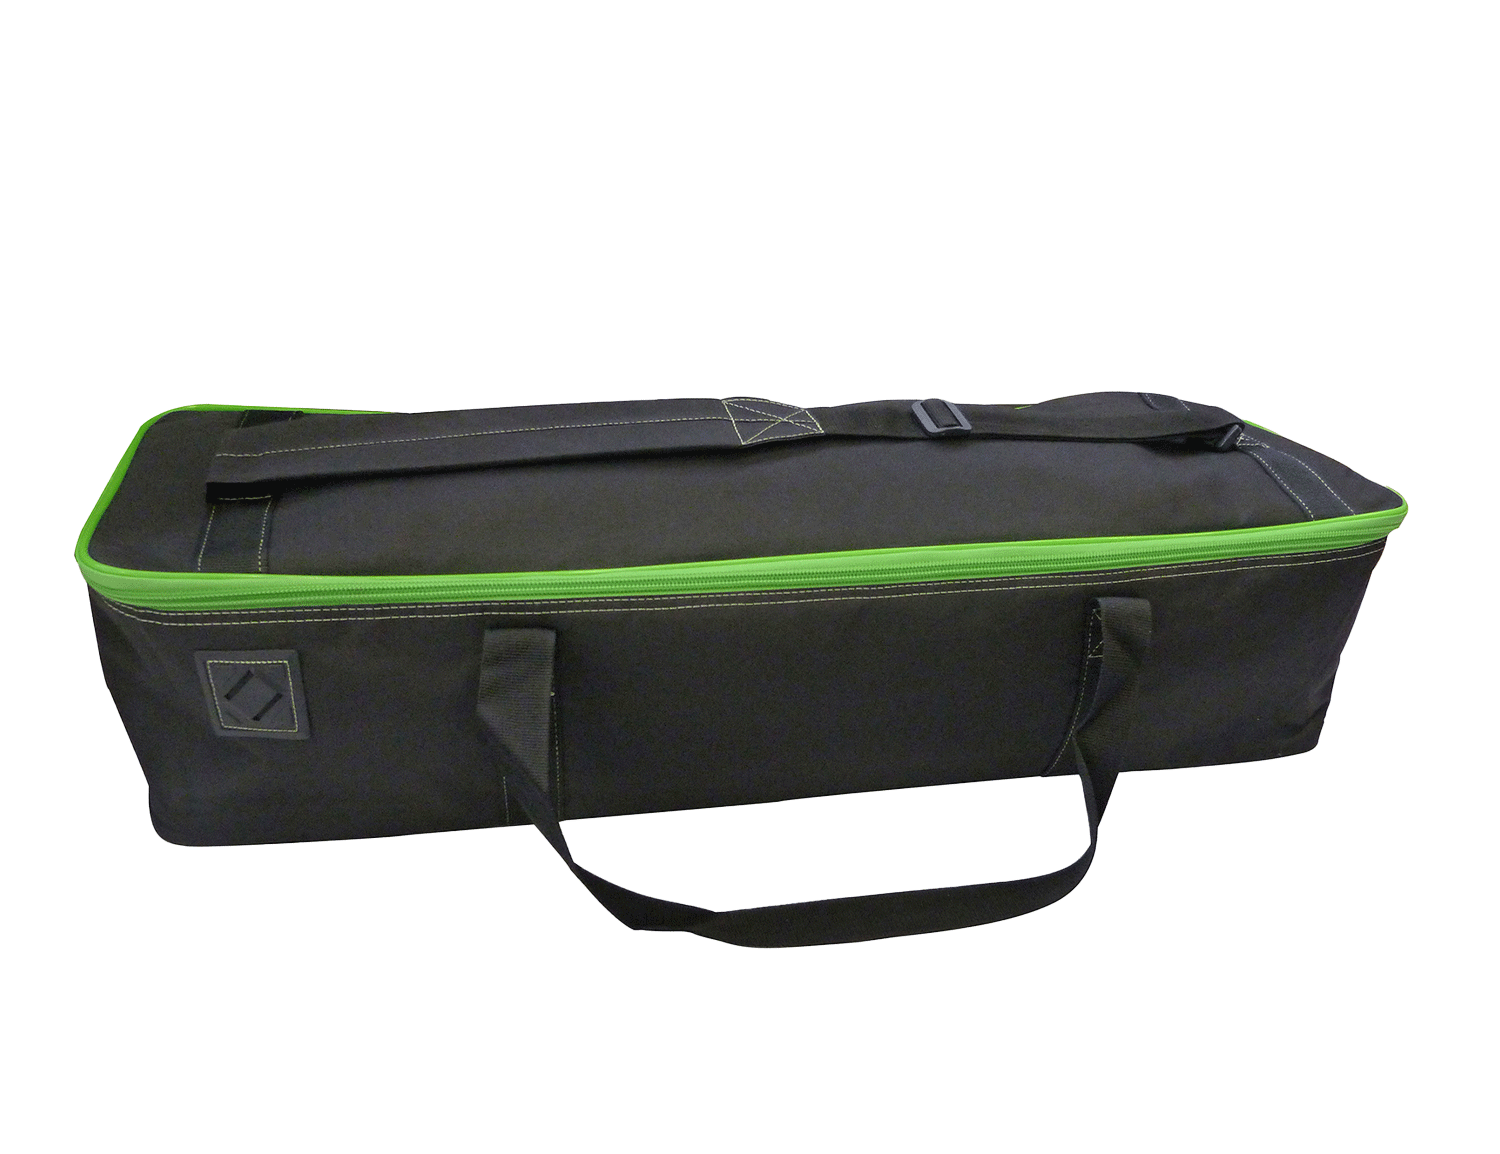 Cases and carry bags